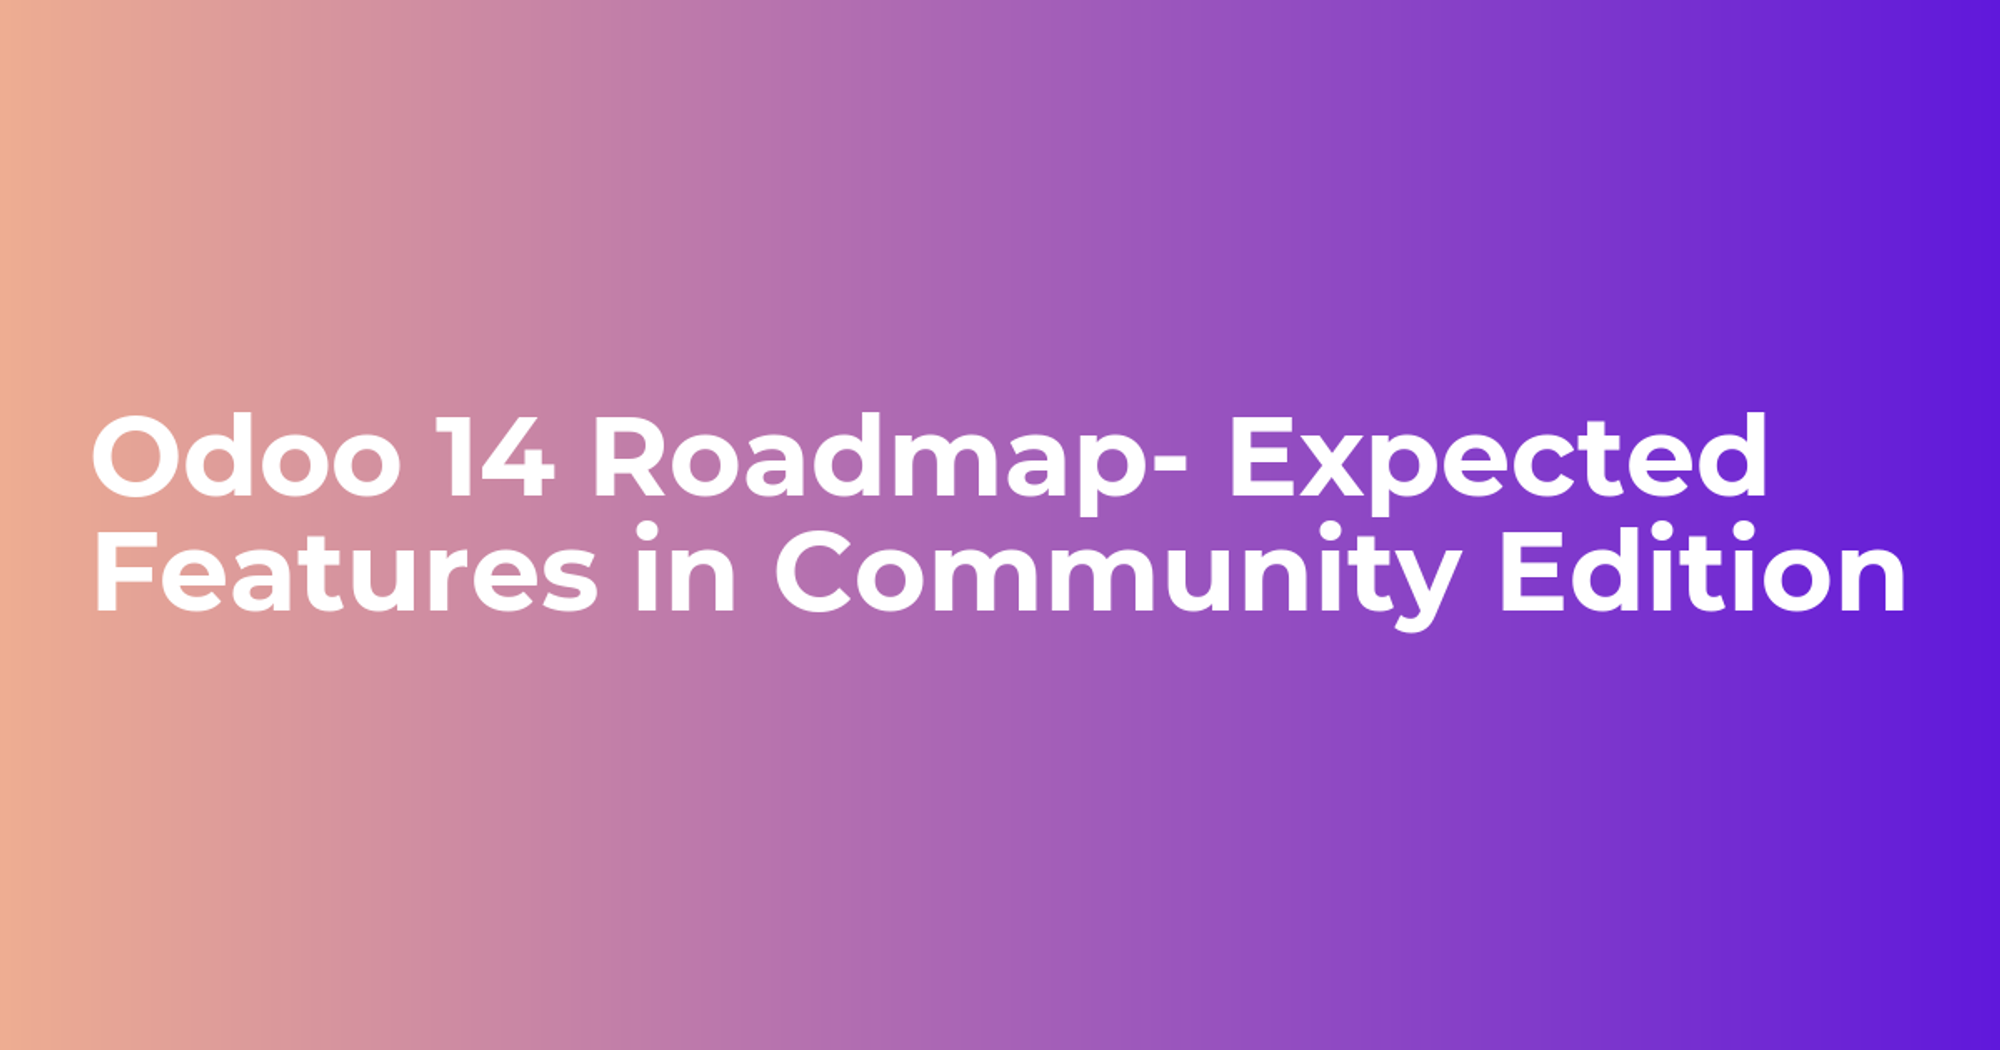 Odoo 14 Roadmap- Expected Features in Community Edition